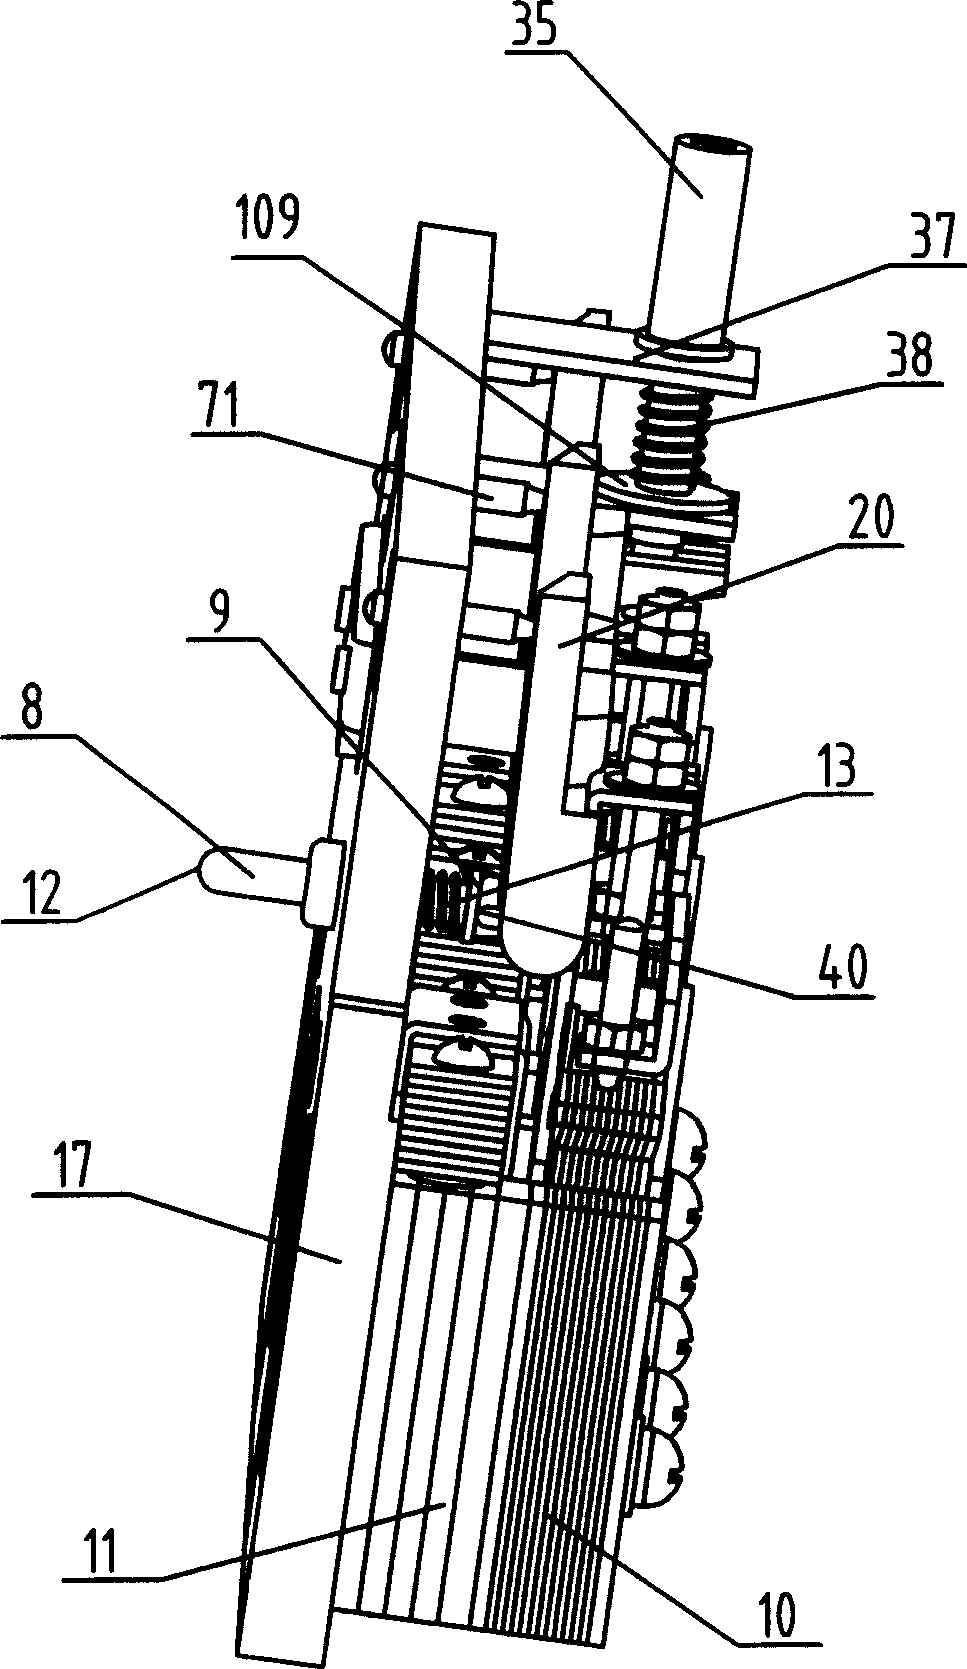 Split thermomagnetic adjustable release device for circuit breaker